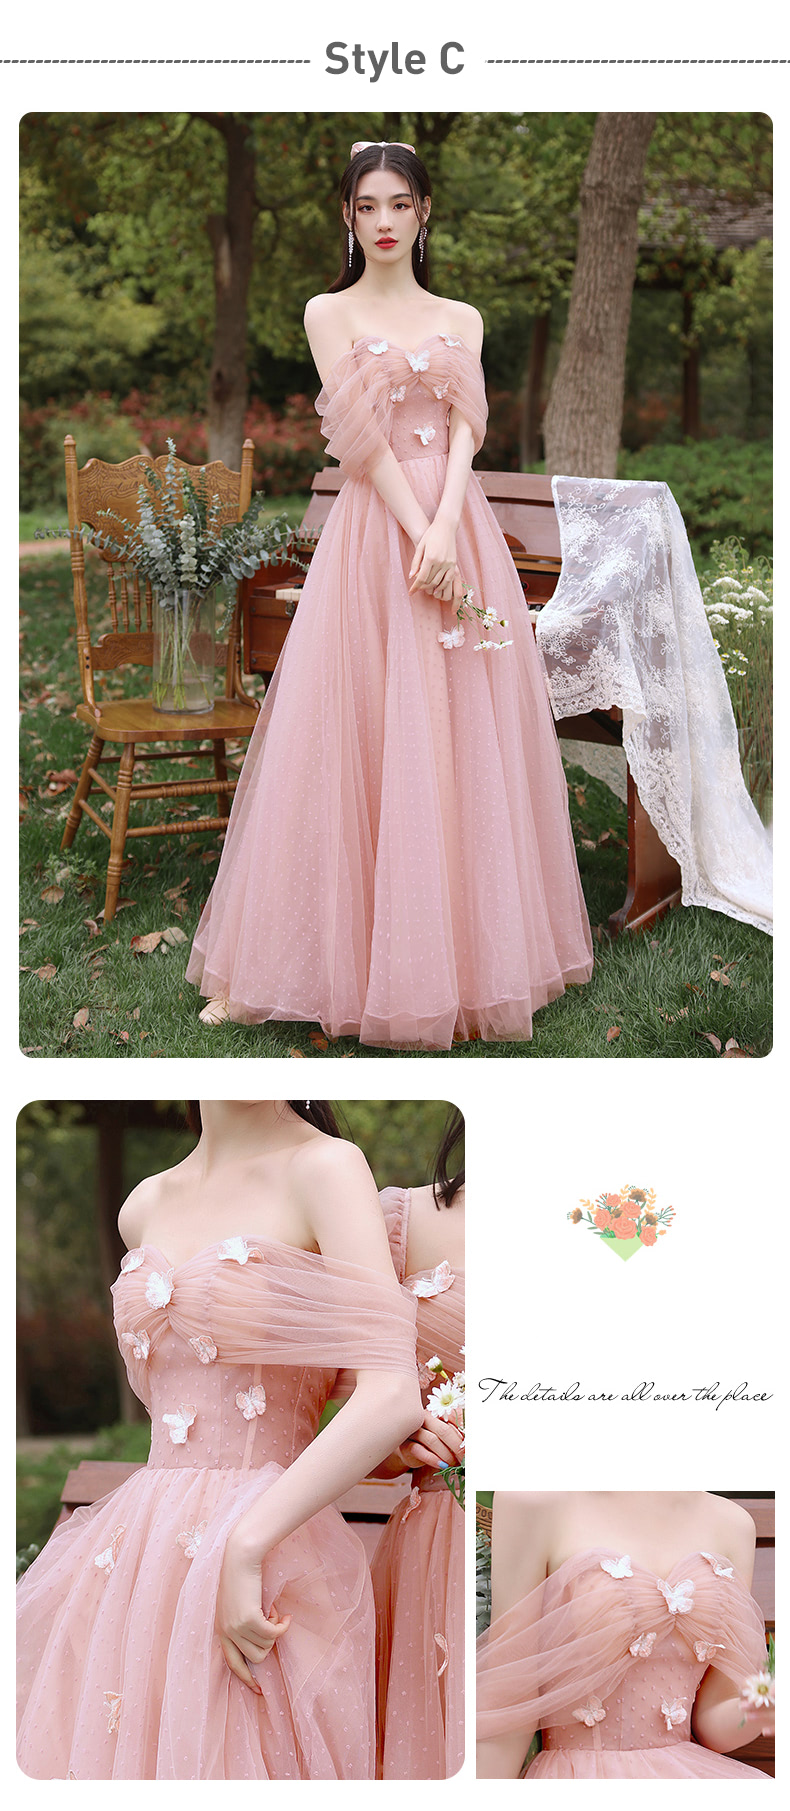 A-Line-Pink-Tulle-Bridesmaid-Formal-Wedding-Guest-Party-Dress19.jpg